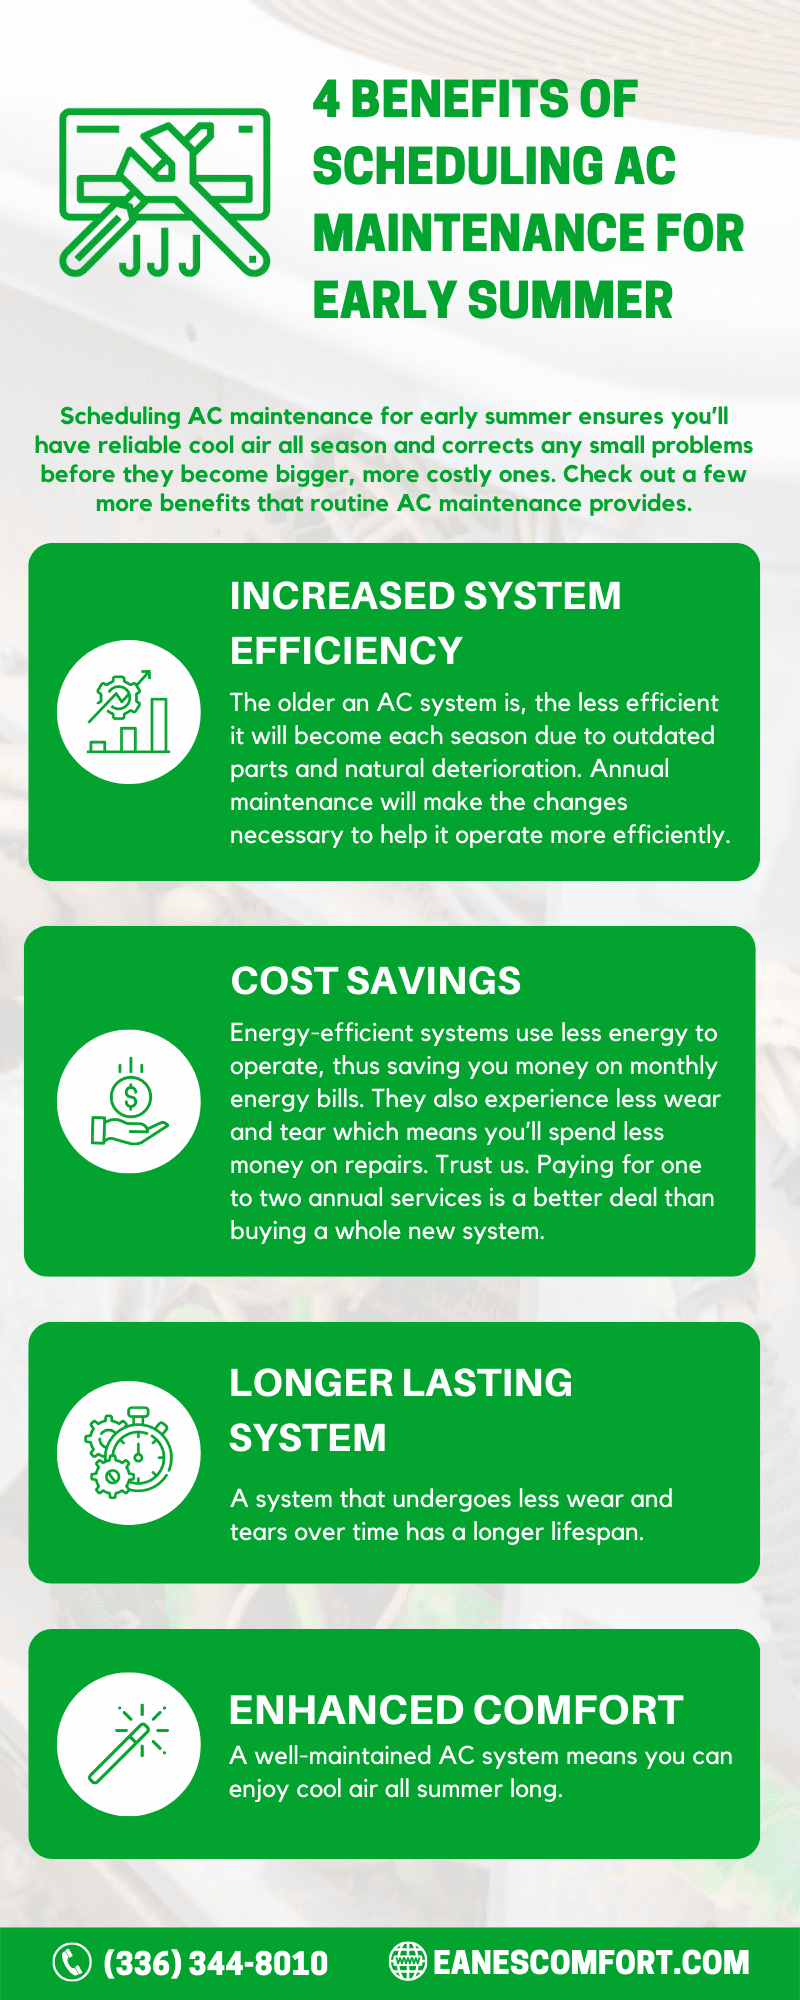 4 Benefits of Scheduling AC Maintenance for Early Summer